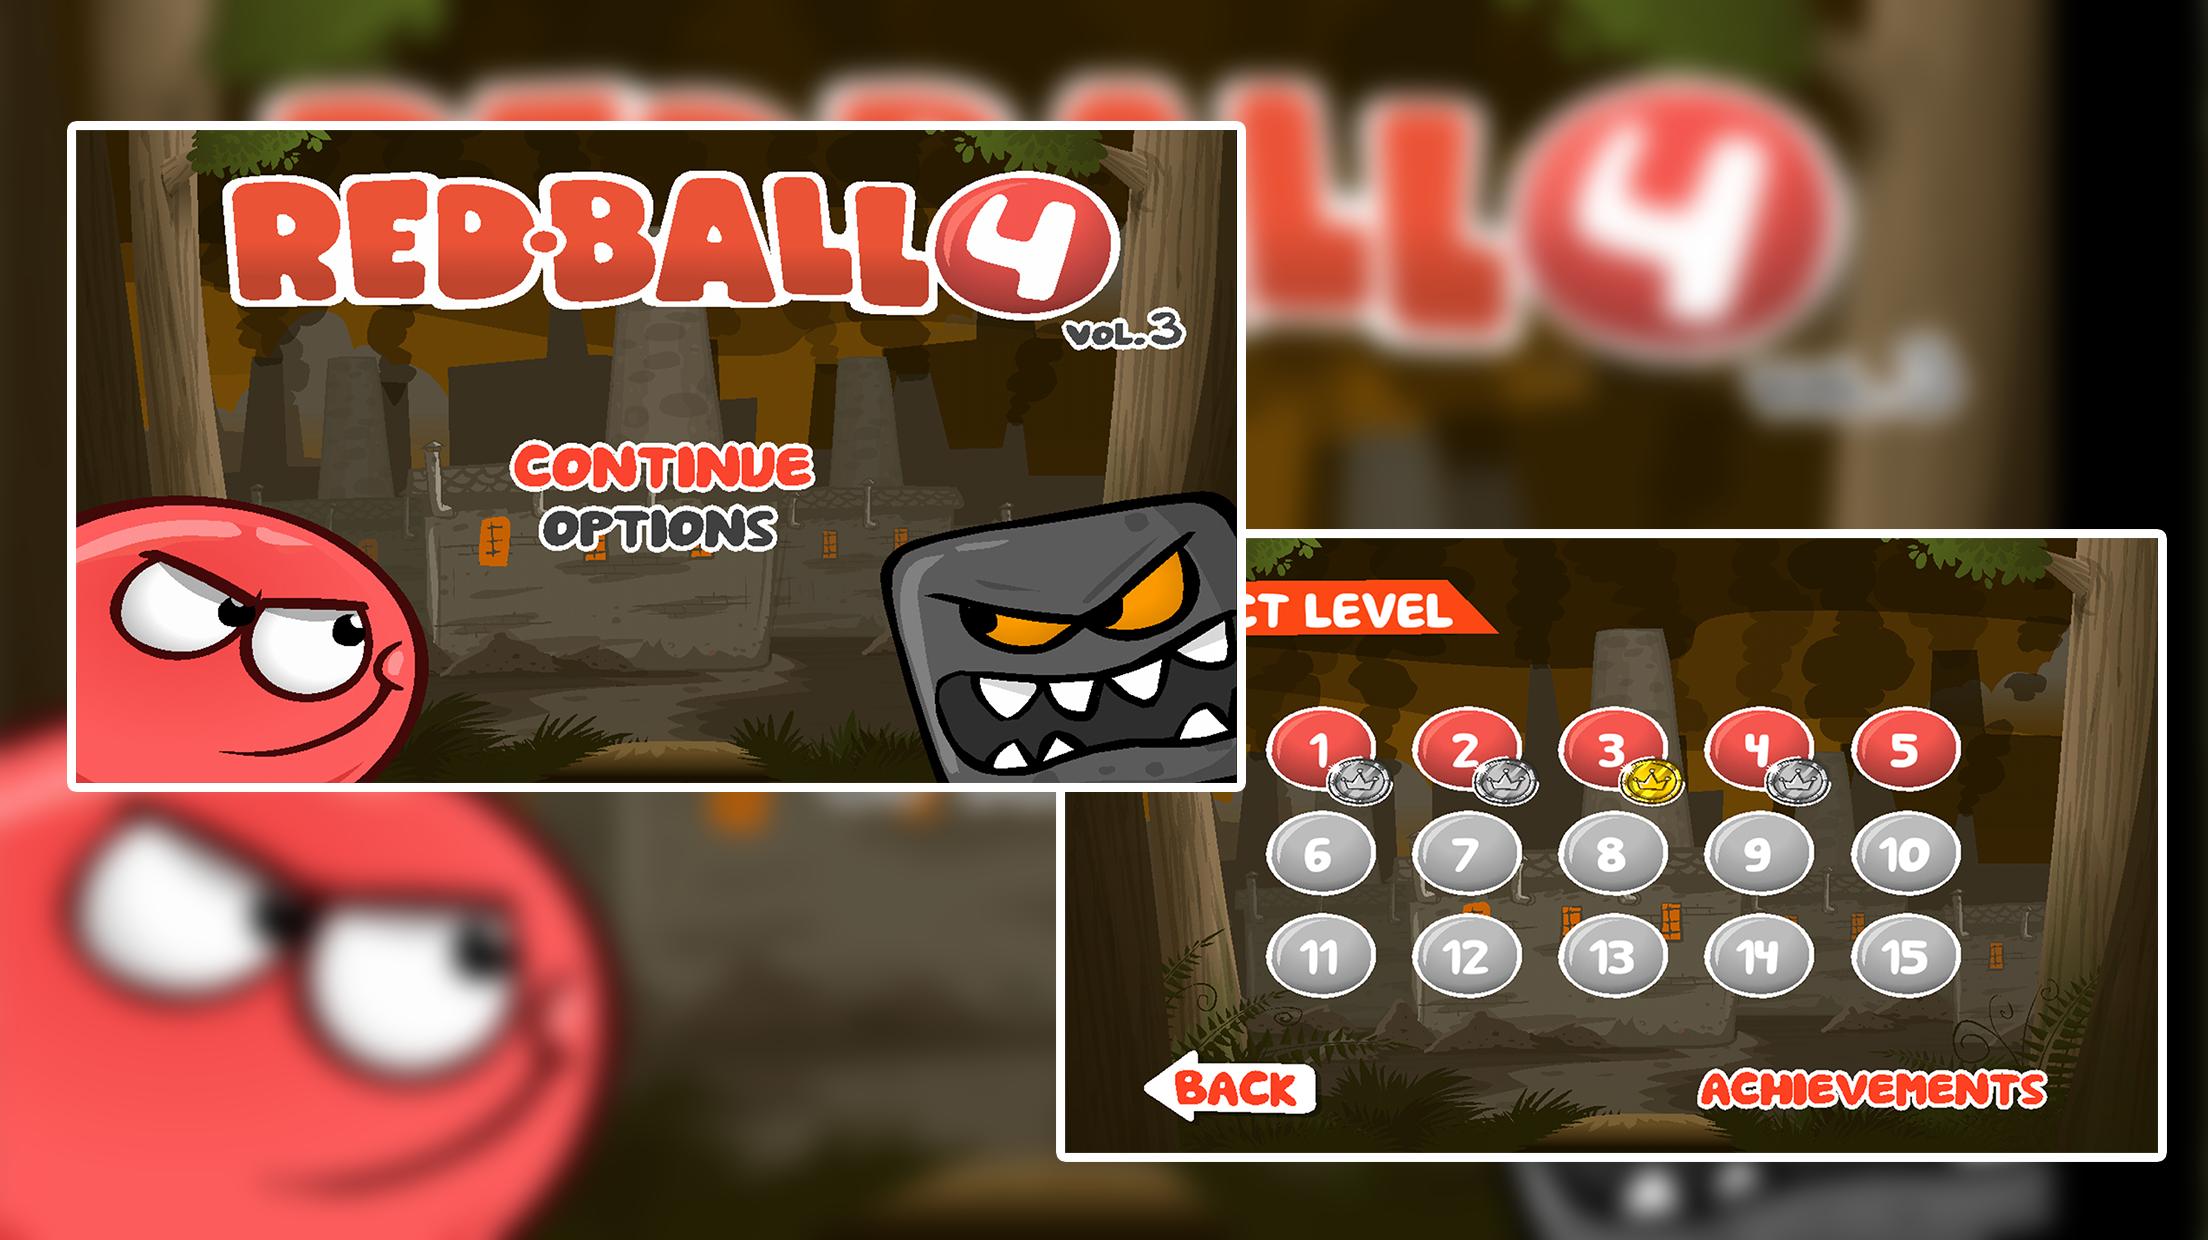 Ansigt opad lampe oxiderer Red Ball Adventure 4: Big Ball Volume 3 APK pour Android Télécharger